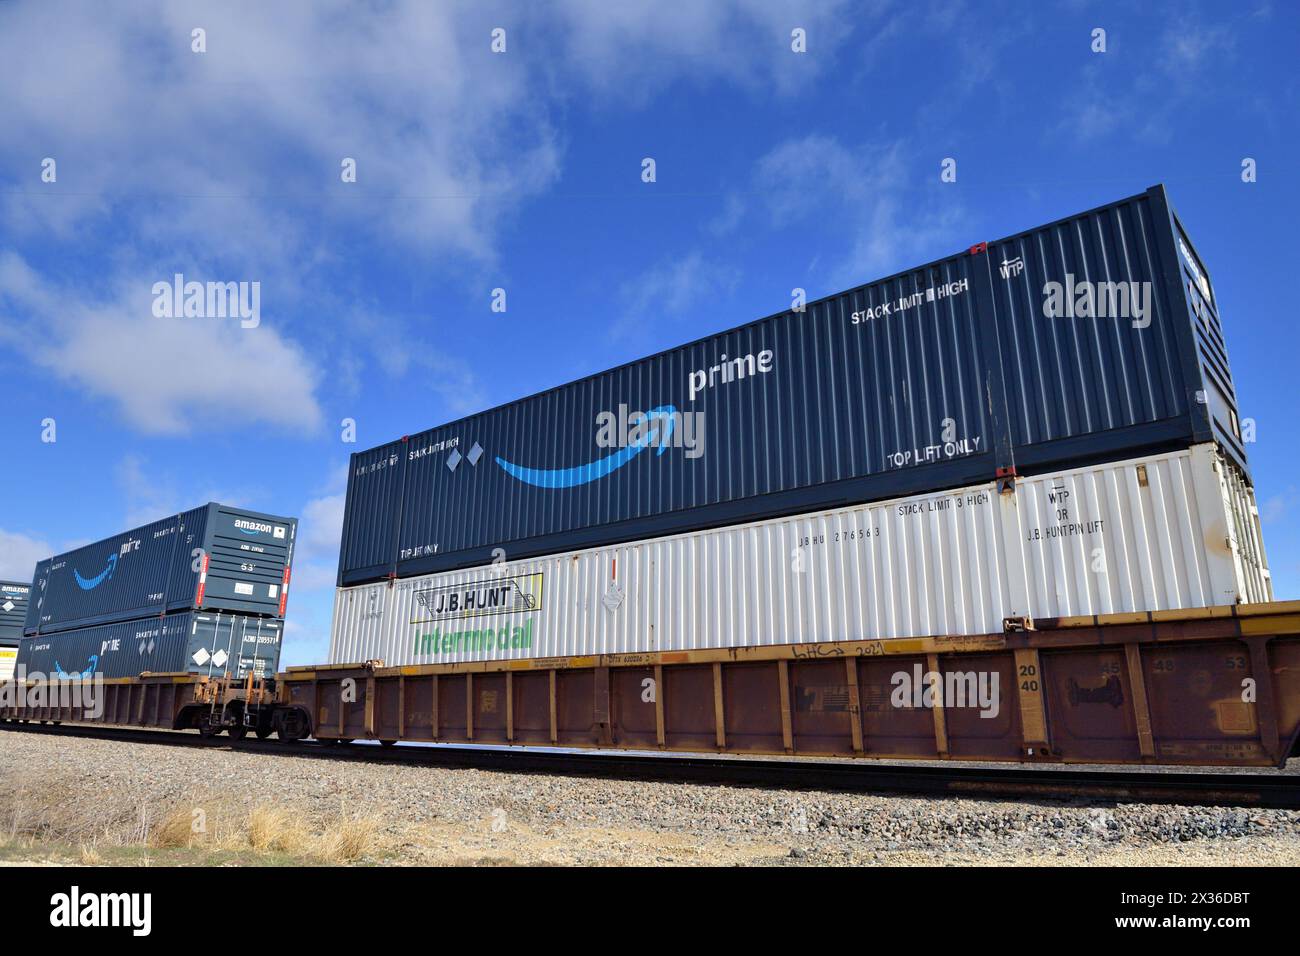 Lee, Illinois, USA. A Burlington Northern Santa Fe intermodal freight train comptised of various corporate containers including Amazon Prime and J.B. Stock Photo